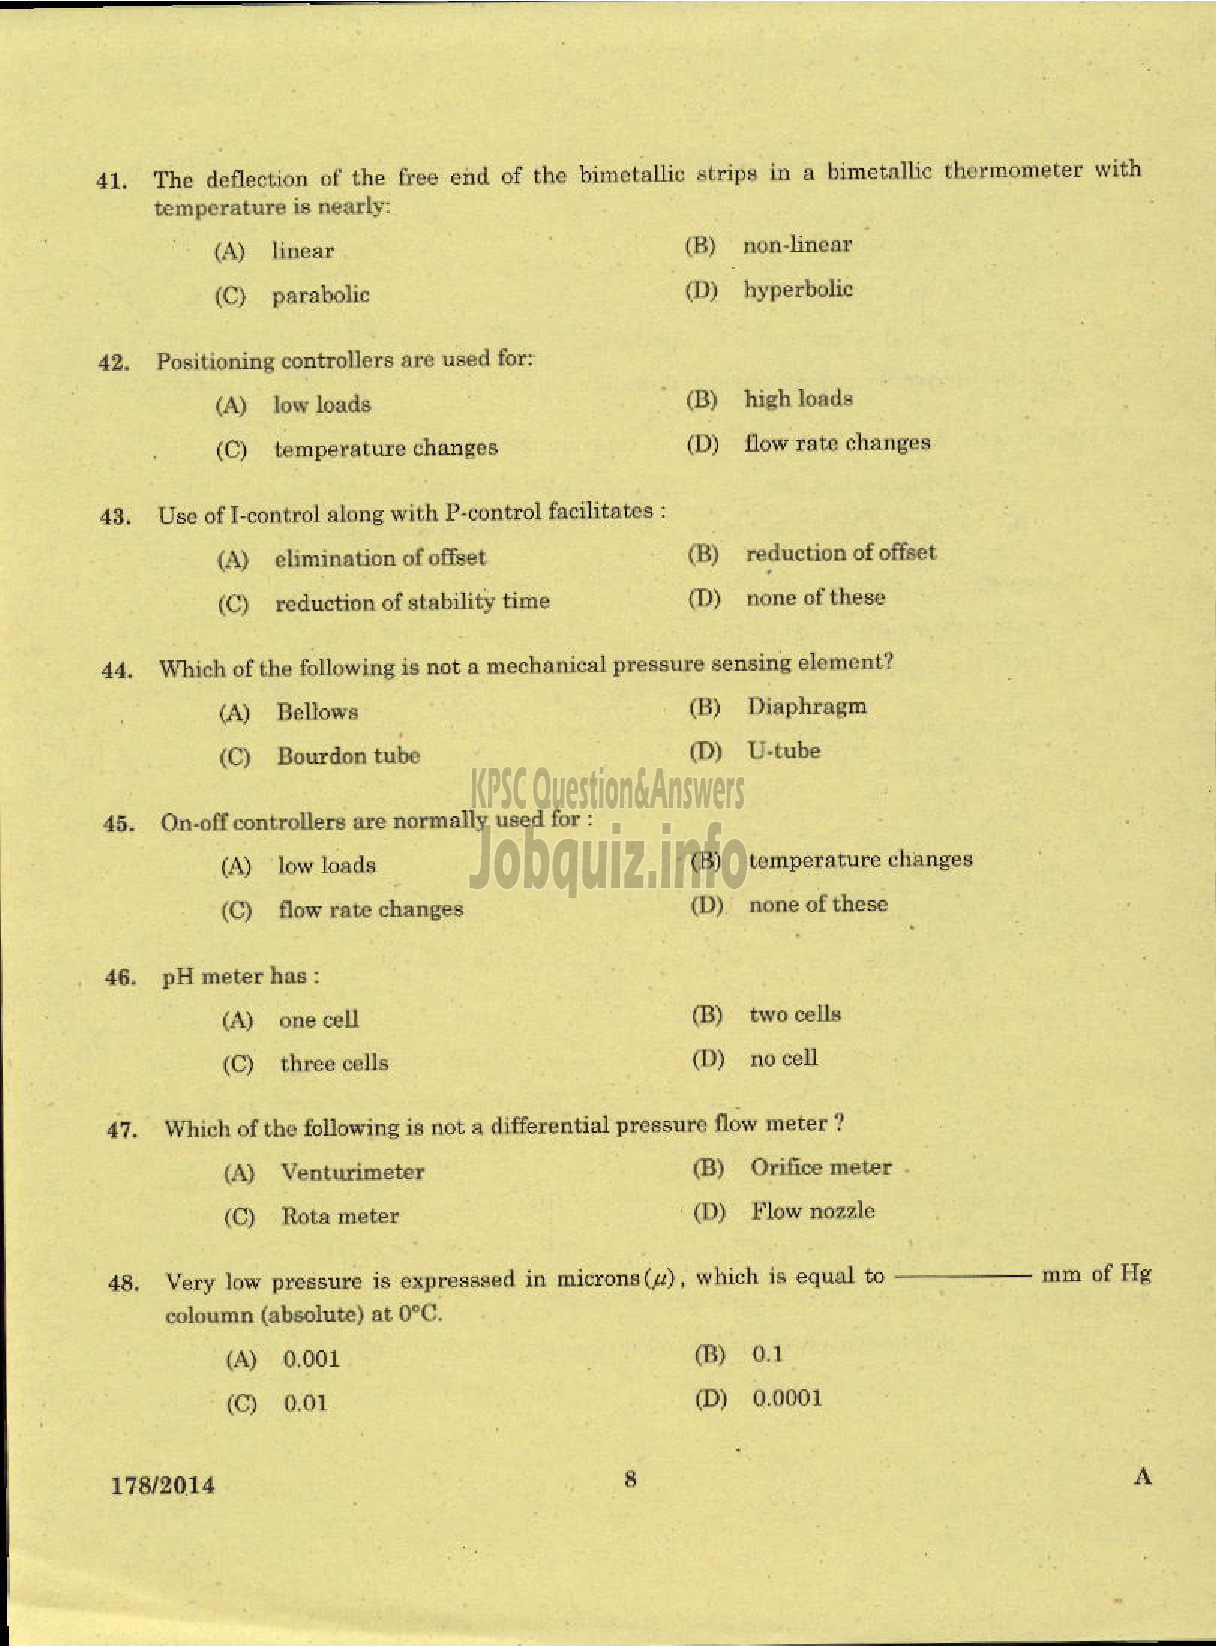 Kerala PSC Question Paper - TRADESMAN ELECTRONICS AND INSTRUMENTATION TECHNICAL EDUCATION KNR-6